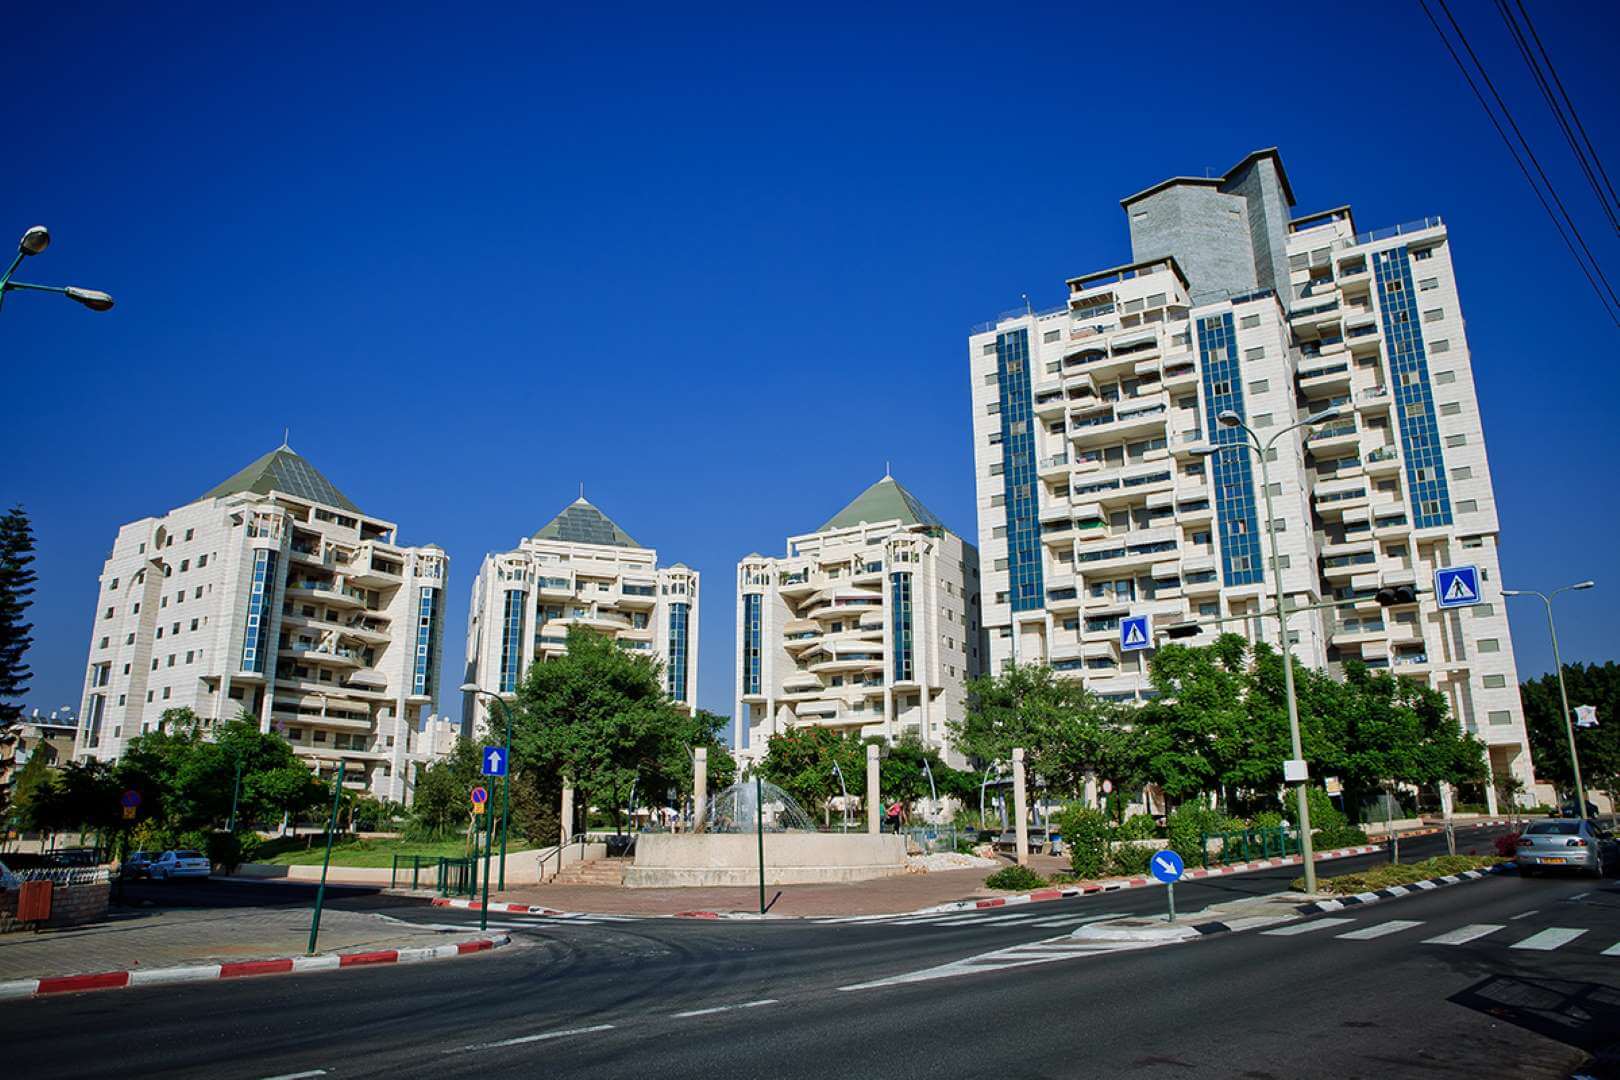 Photograph of buildings from the Marom Ganim project in Petah Tikva